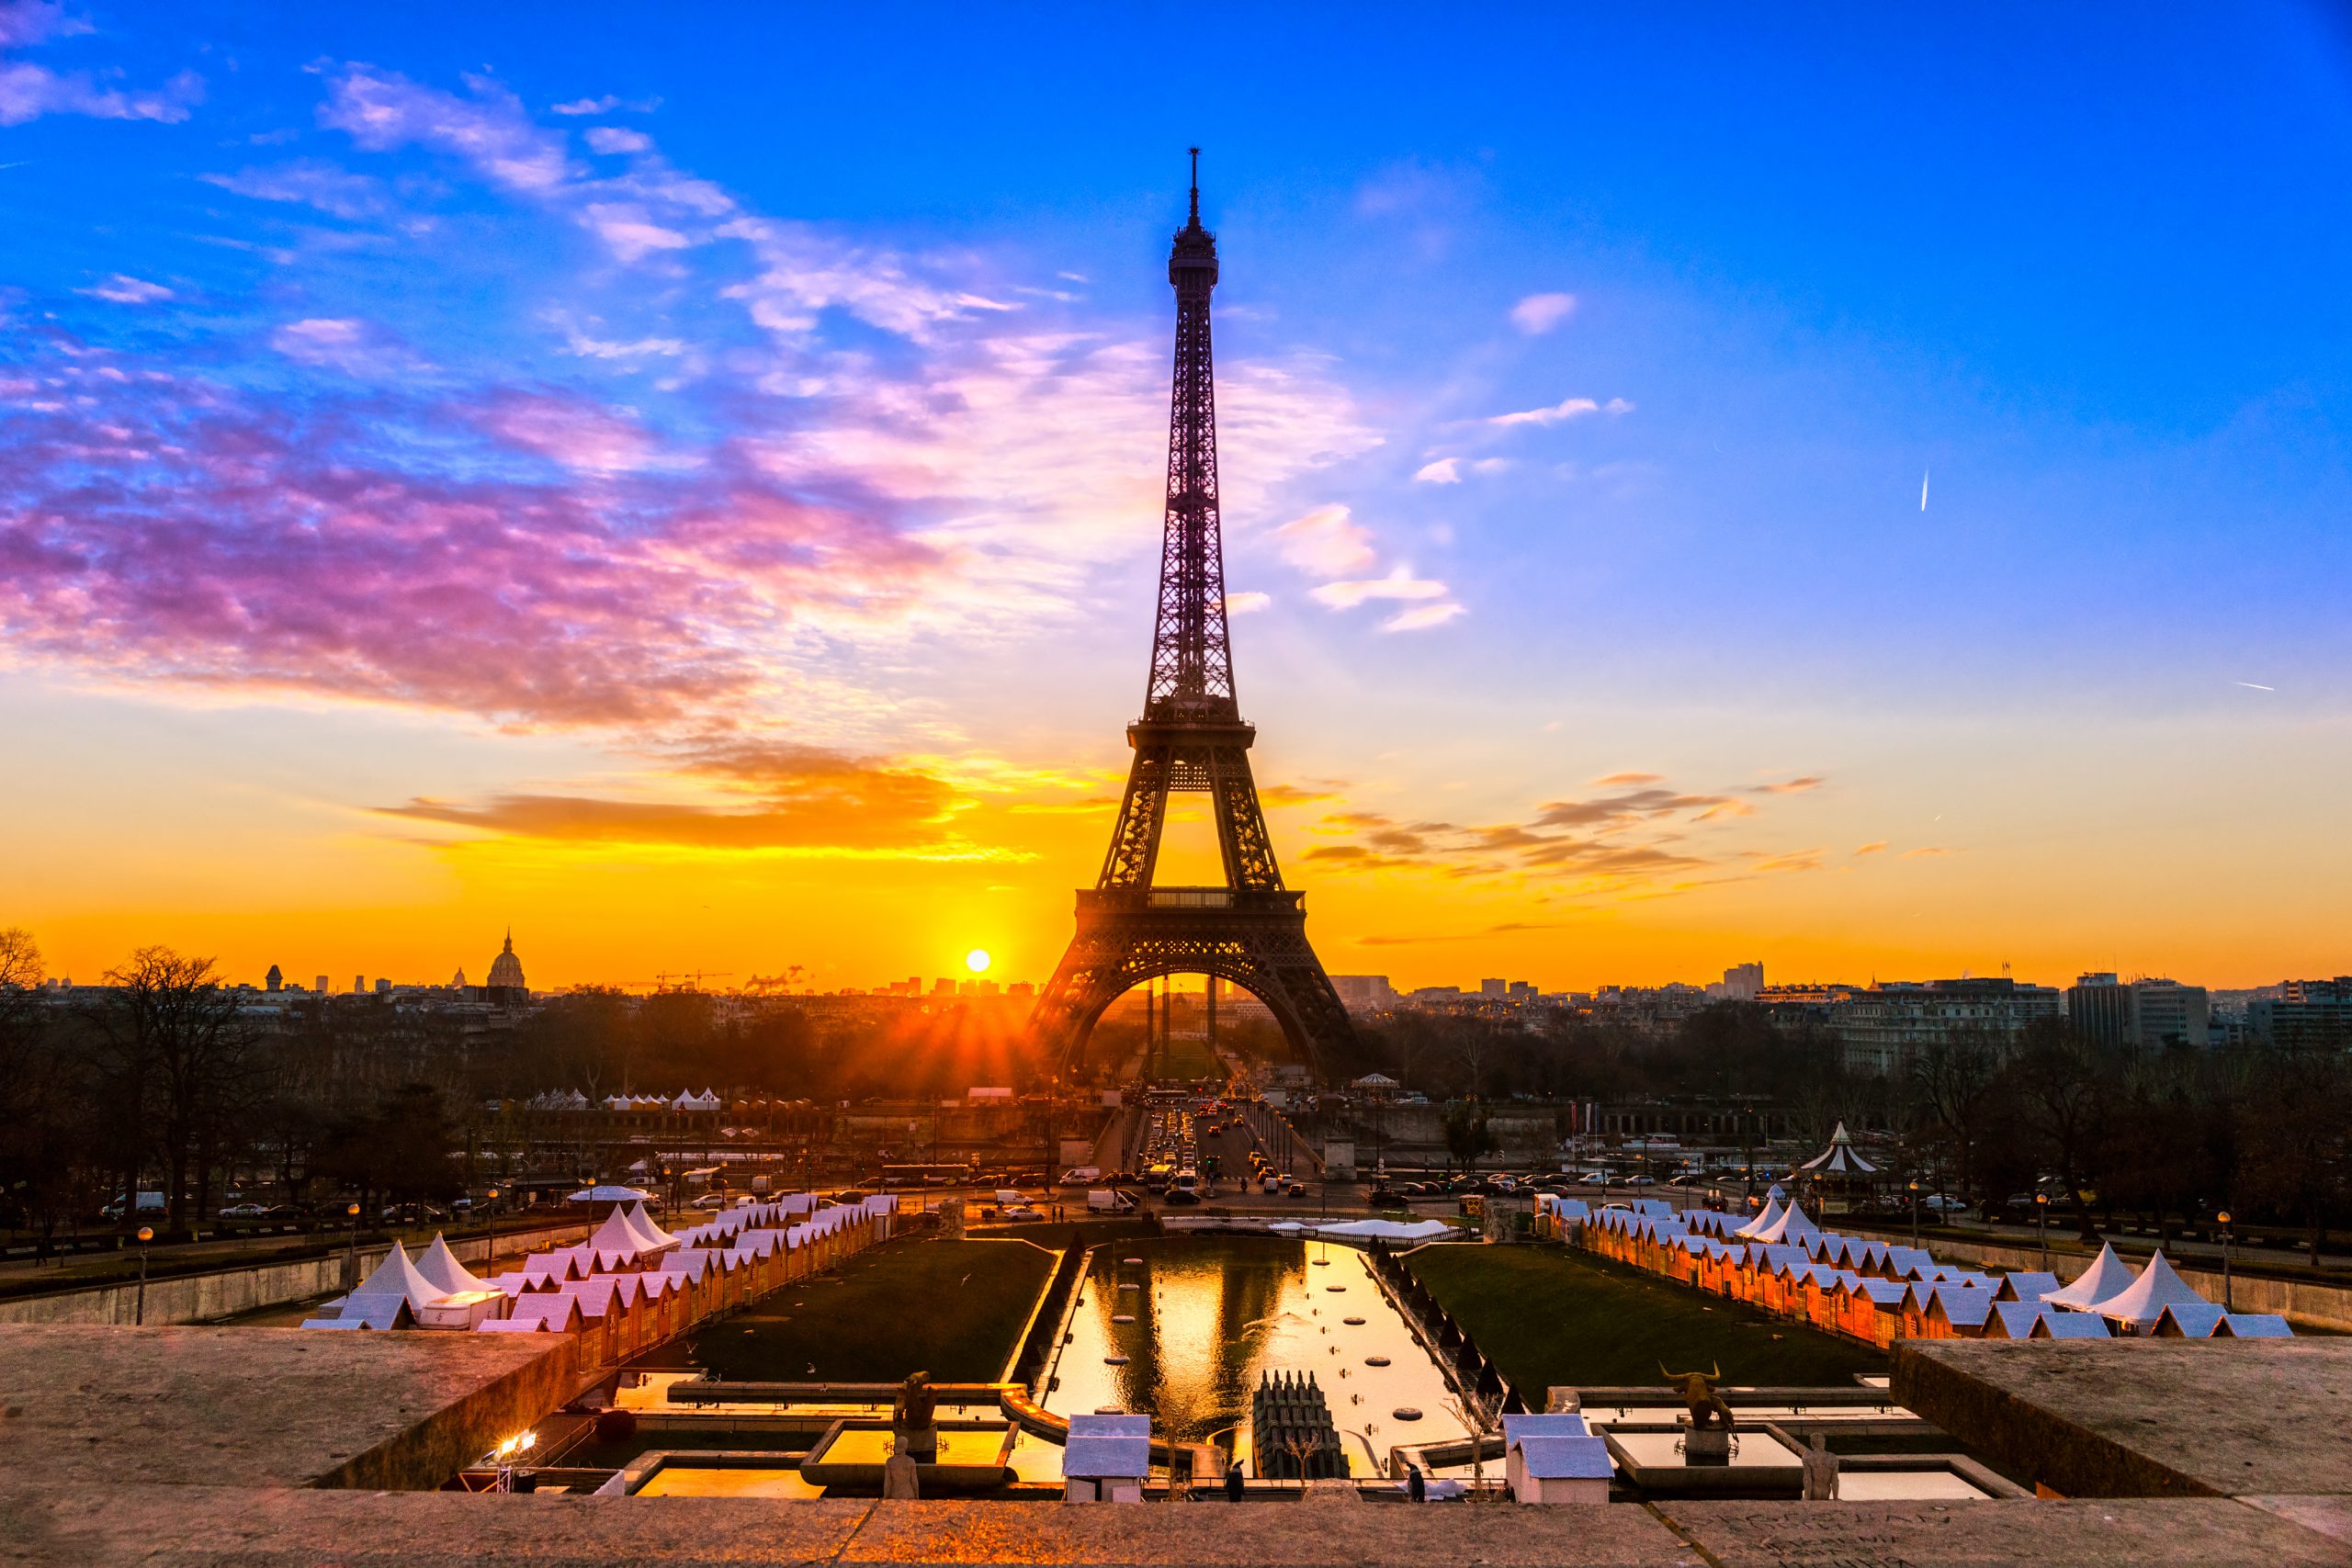 View of the Eiffel tower at sunrise, Paris.